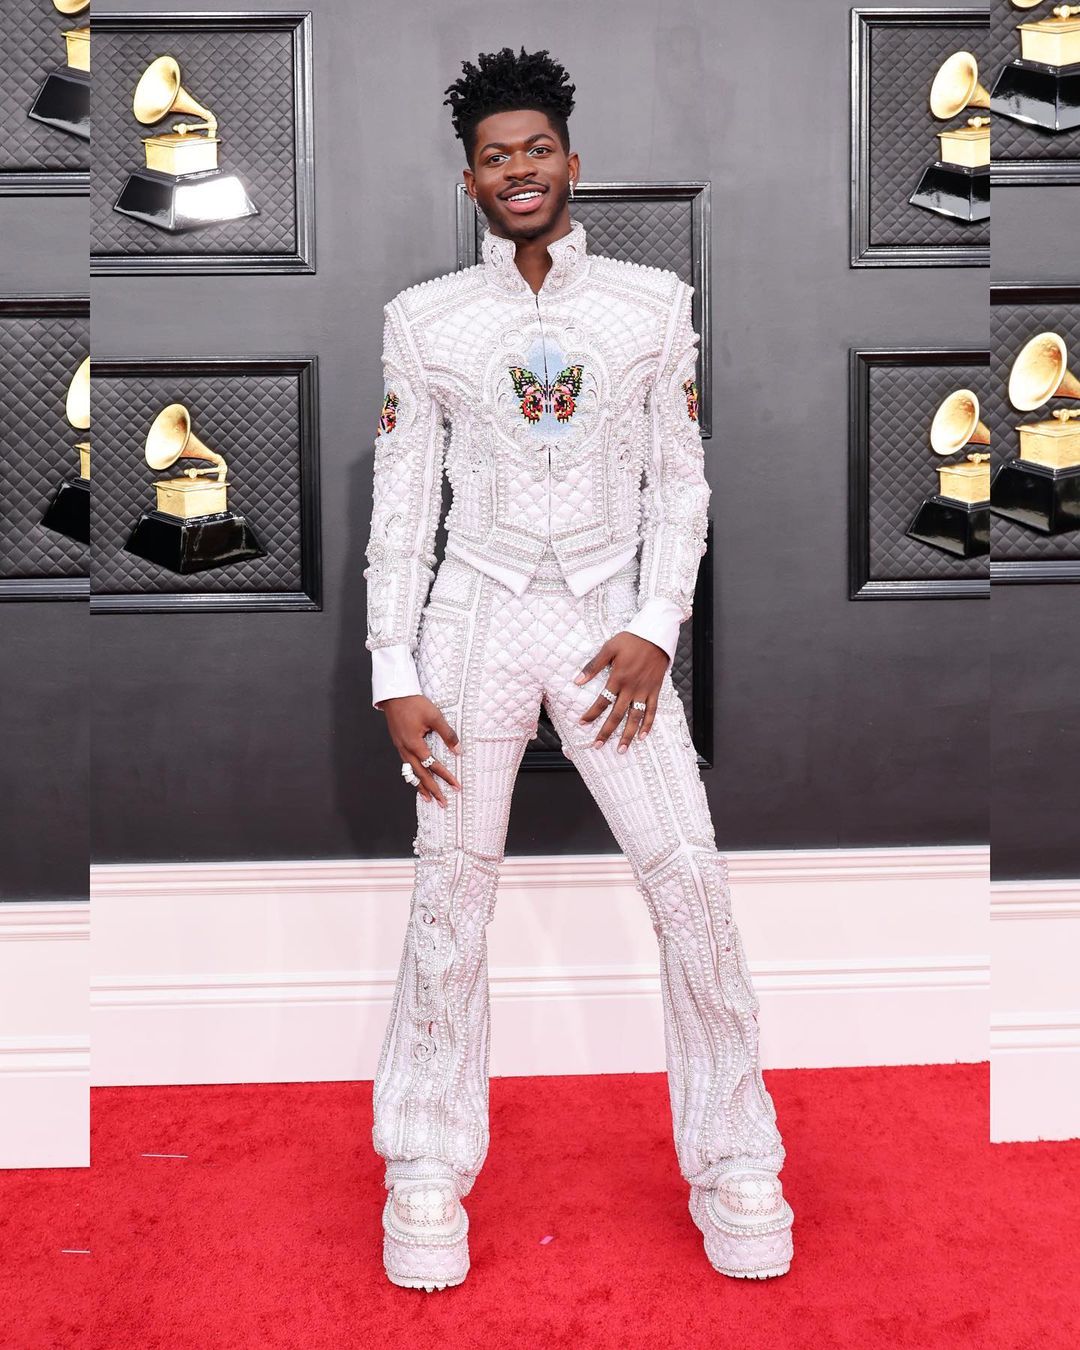 Lil Nas X struck a pose in the embellished white suit by Balmain